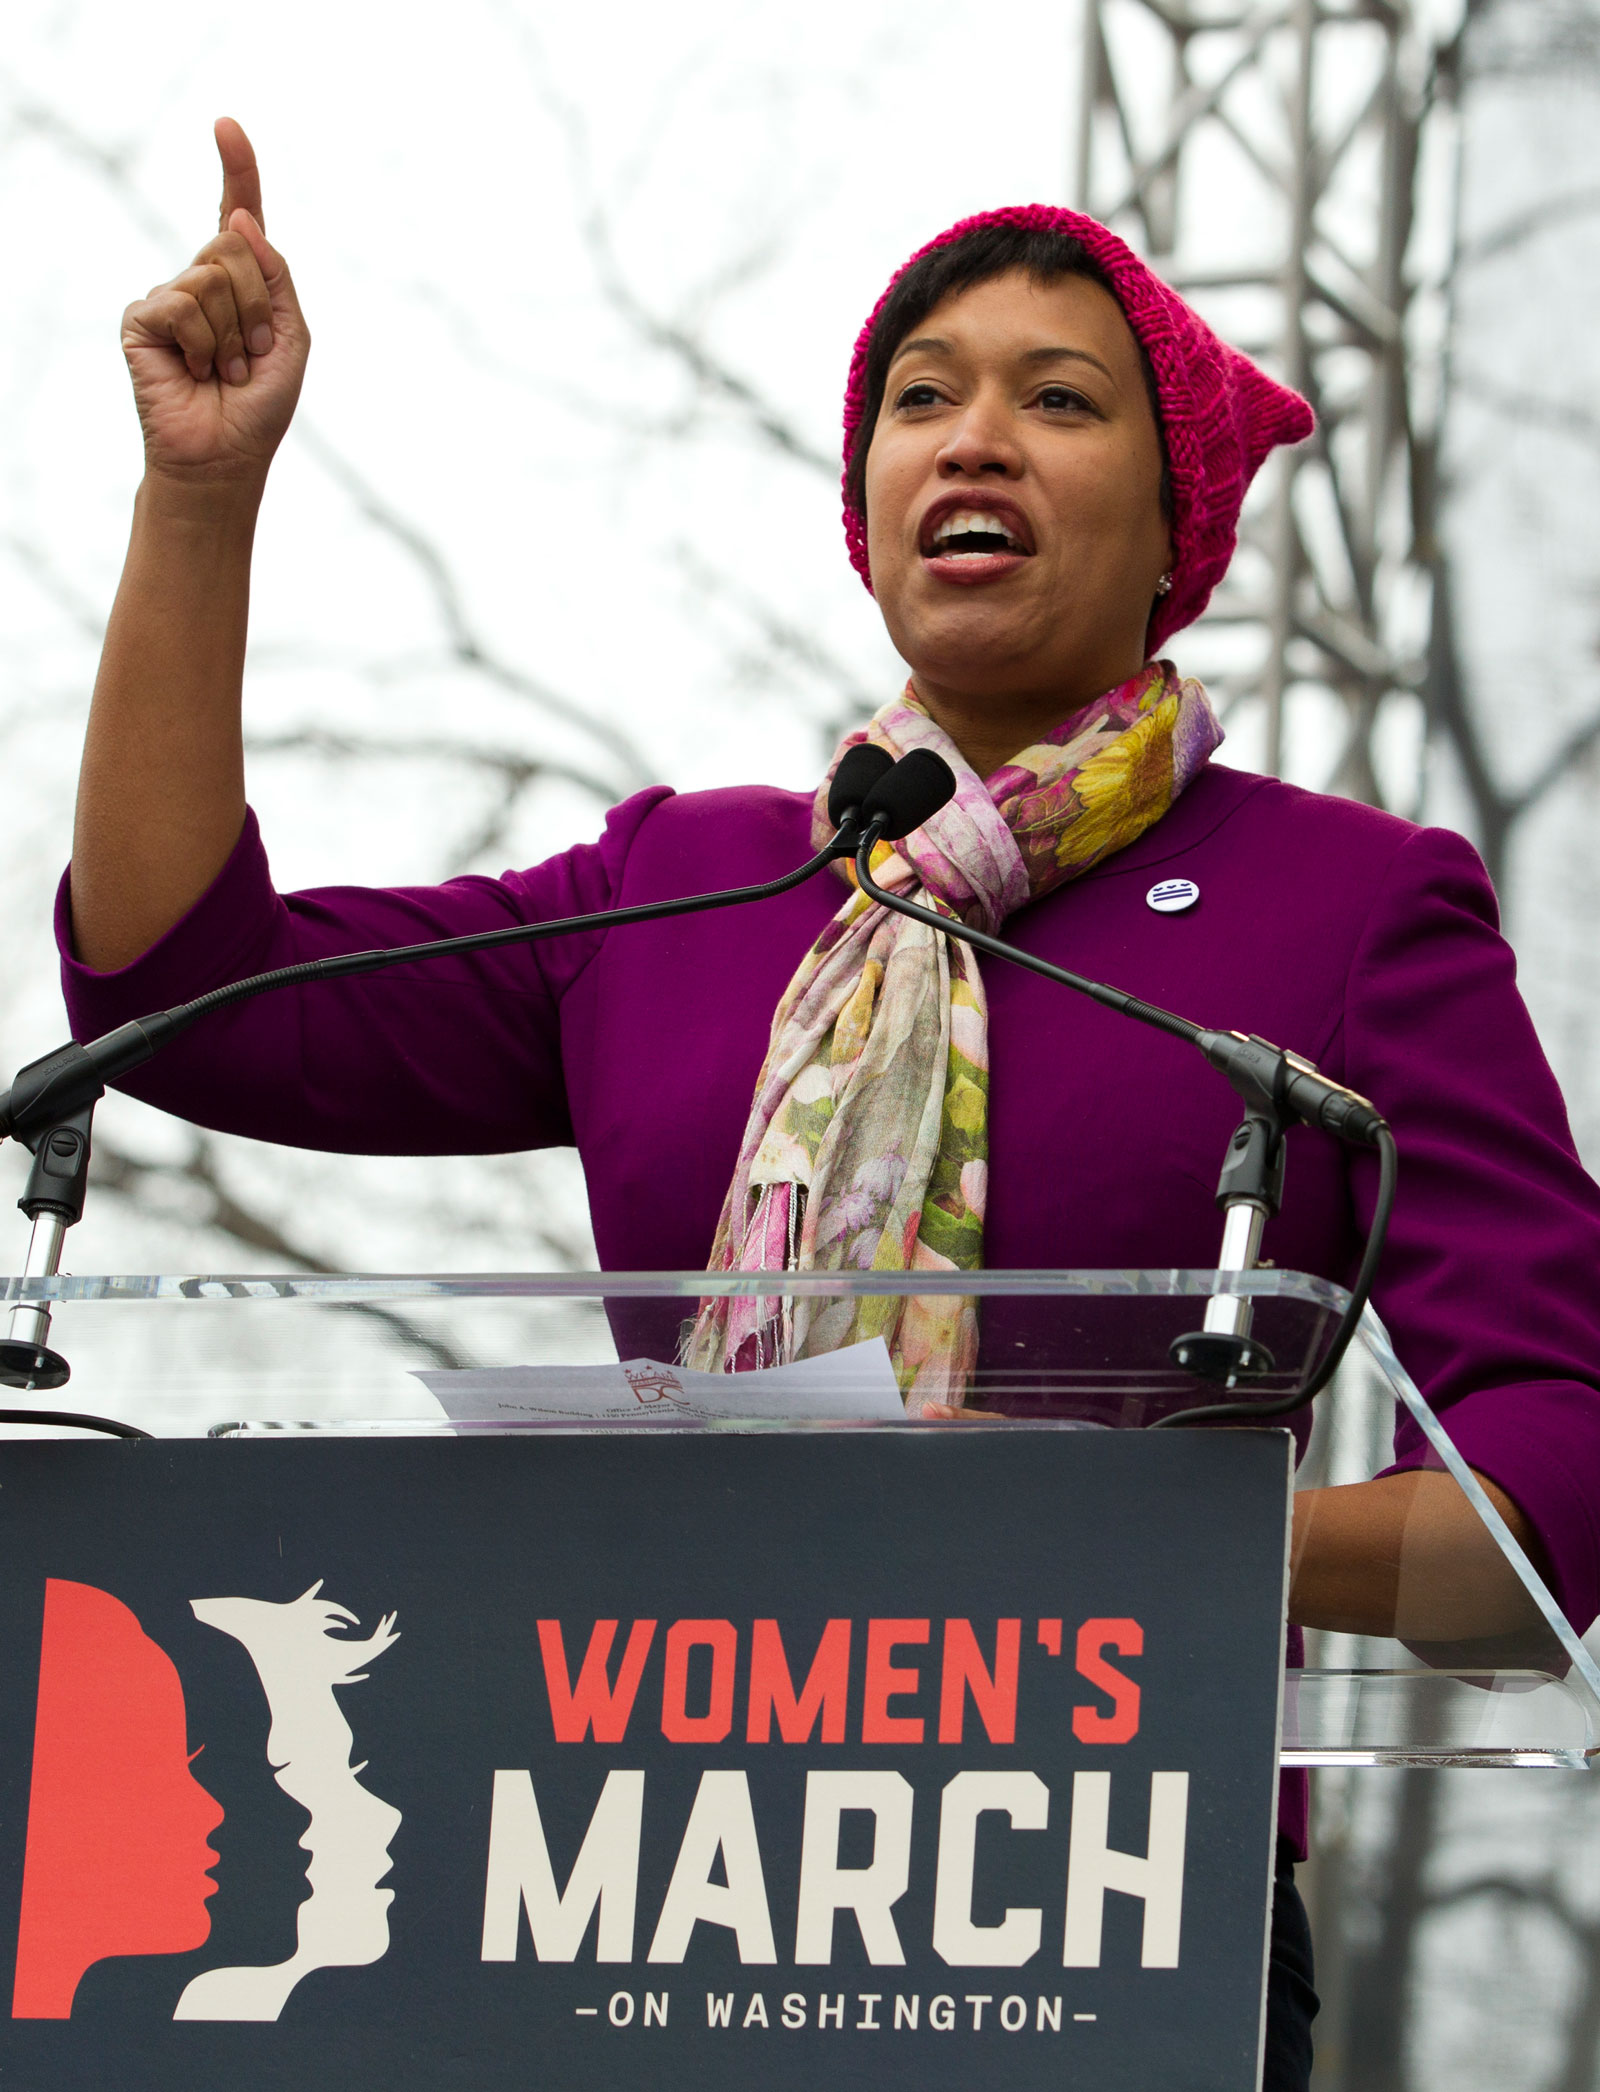 Mayor Muriel Bowser at the Women's March, Washington, D.C., Saturday, January 21, 2017